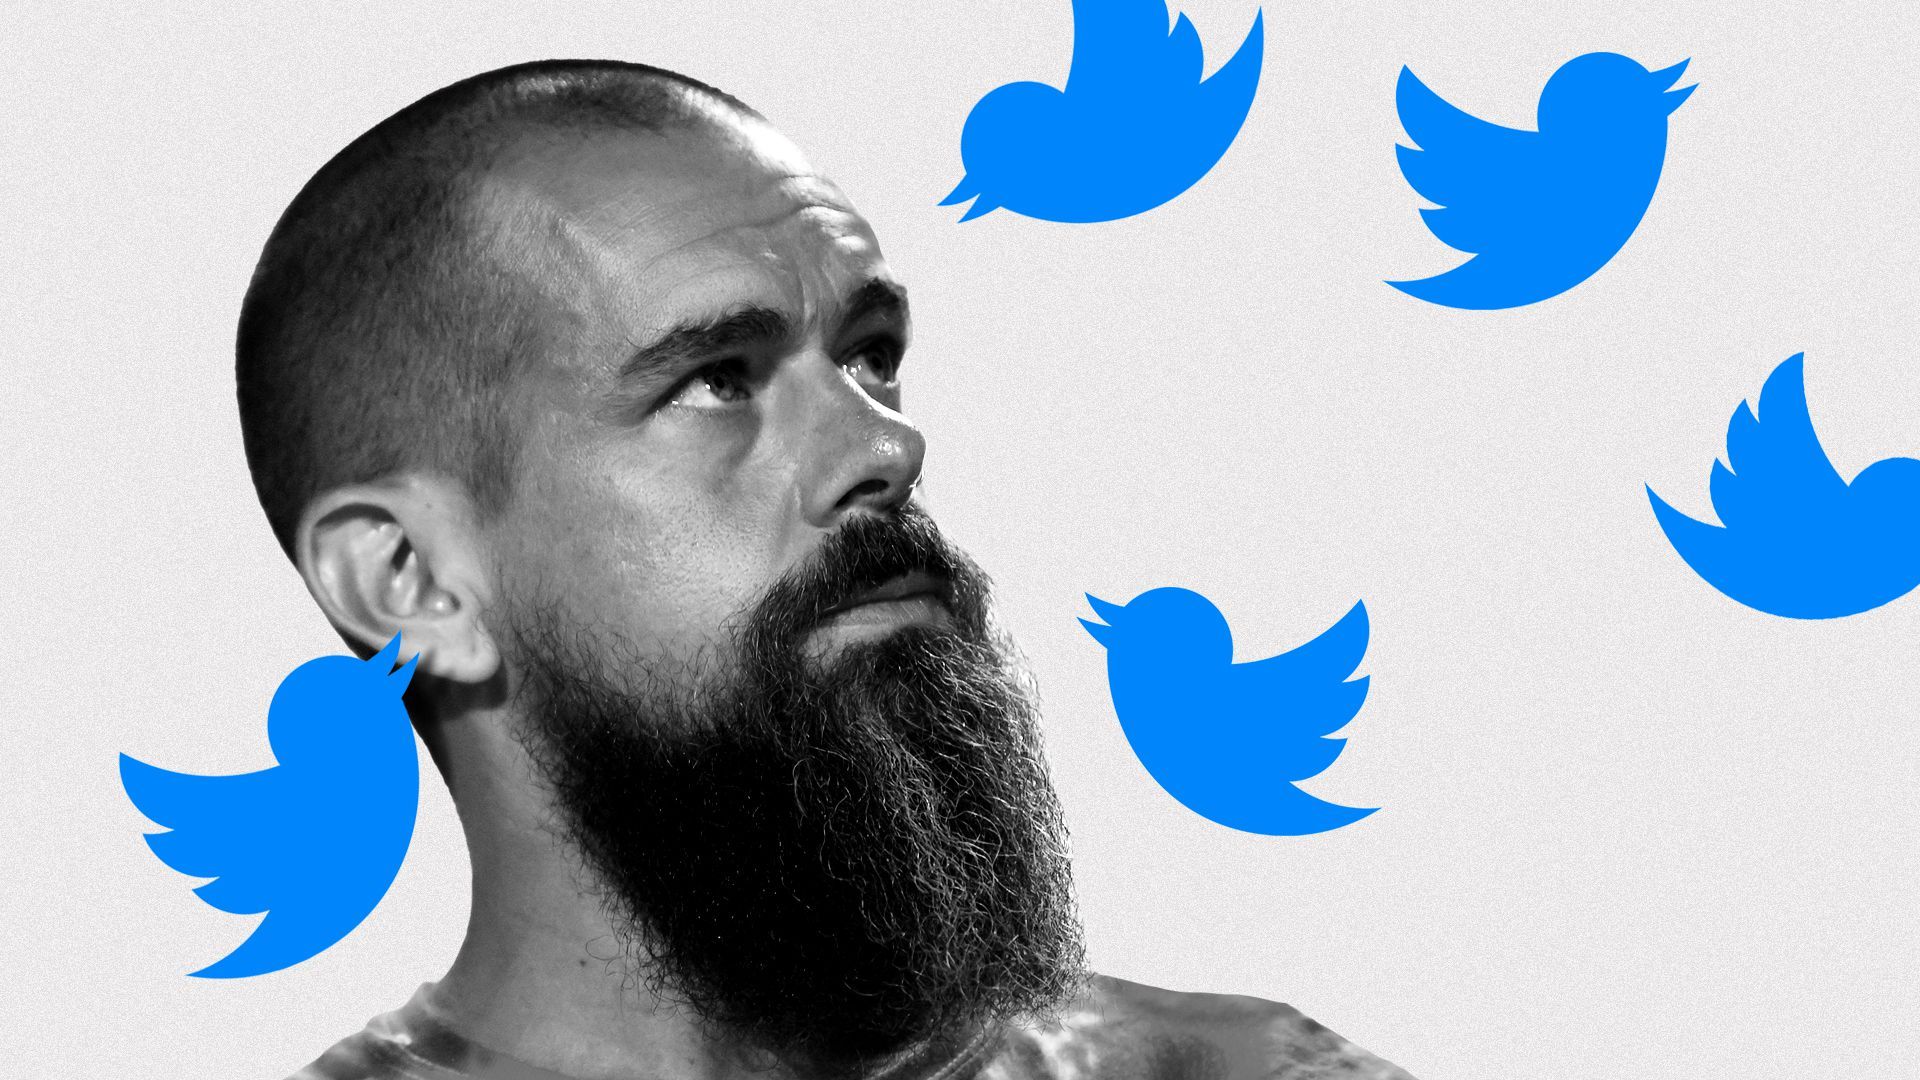 Photo illustration of Twitter CEO Jack Dorsey surrounded by Twitter icons